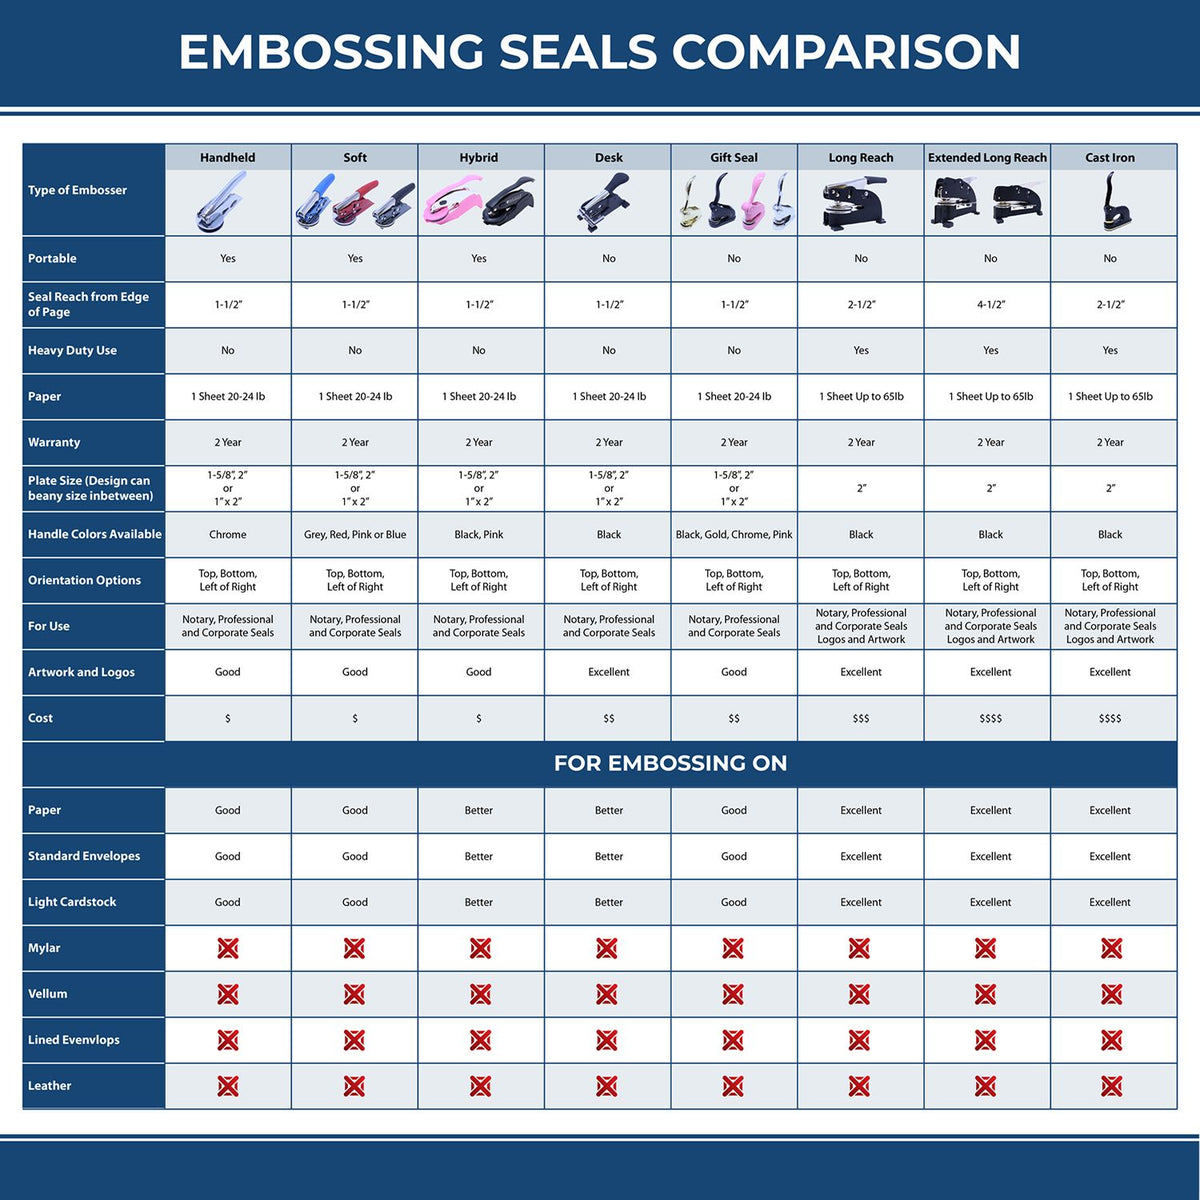 A comparison chart for the different types of mount models available for the Heavy Duty Cast Iron Kentucky Architect Embosser.